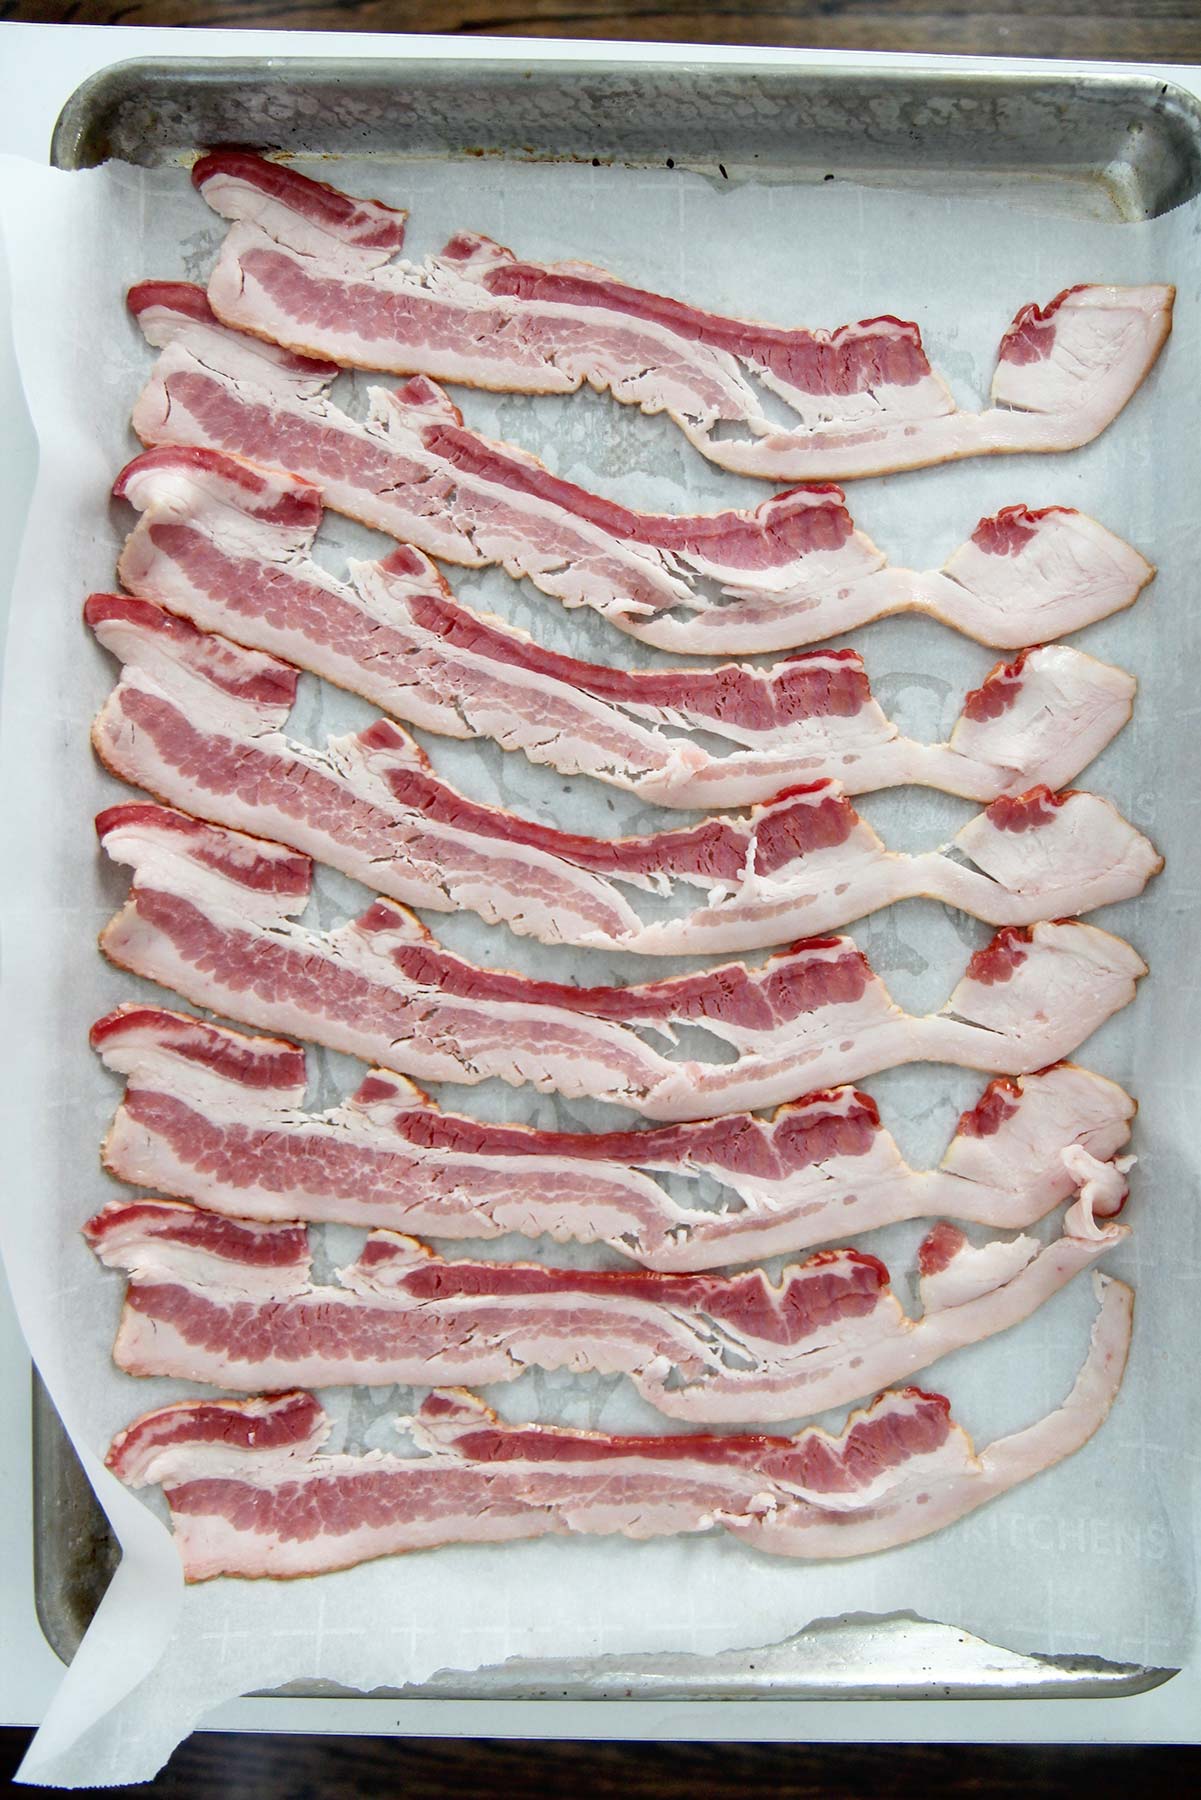 eight slices of raw bacon on a baking sheet lines with parchment paper. 